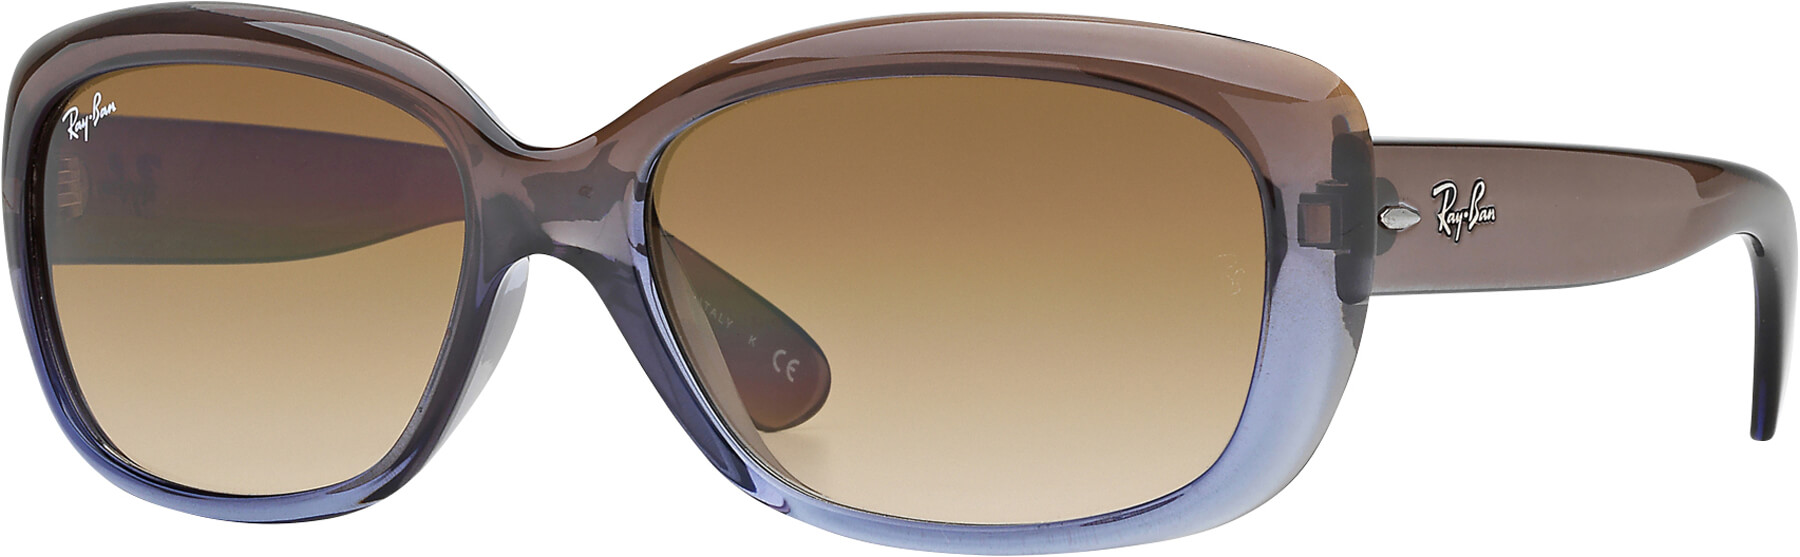 Ray-Ban JACKIE OHH 4101 image number null